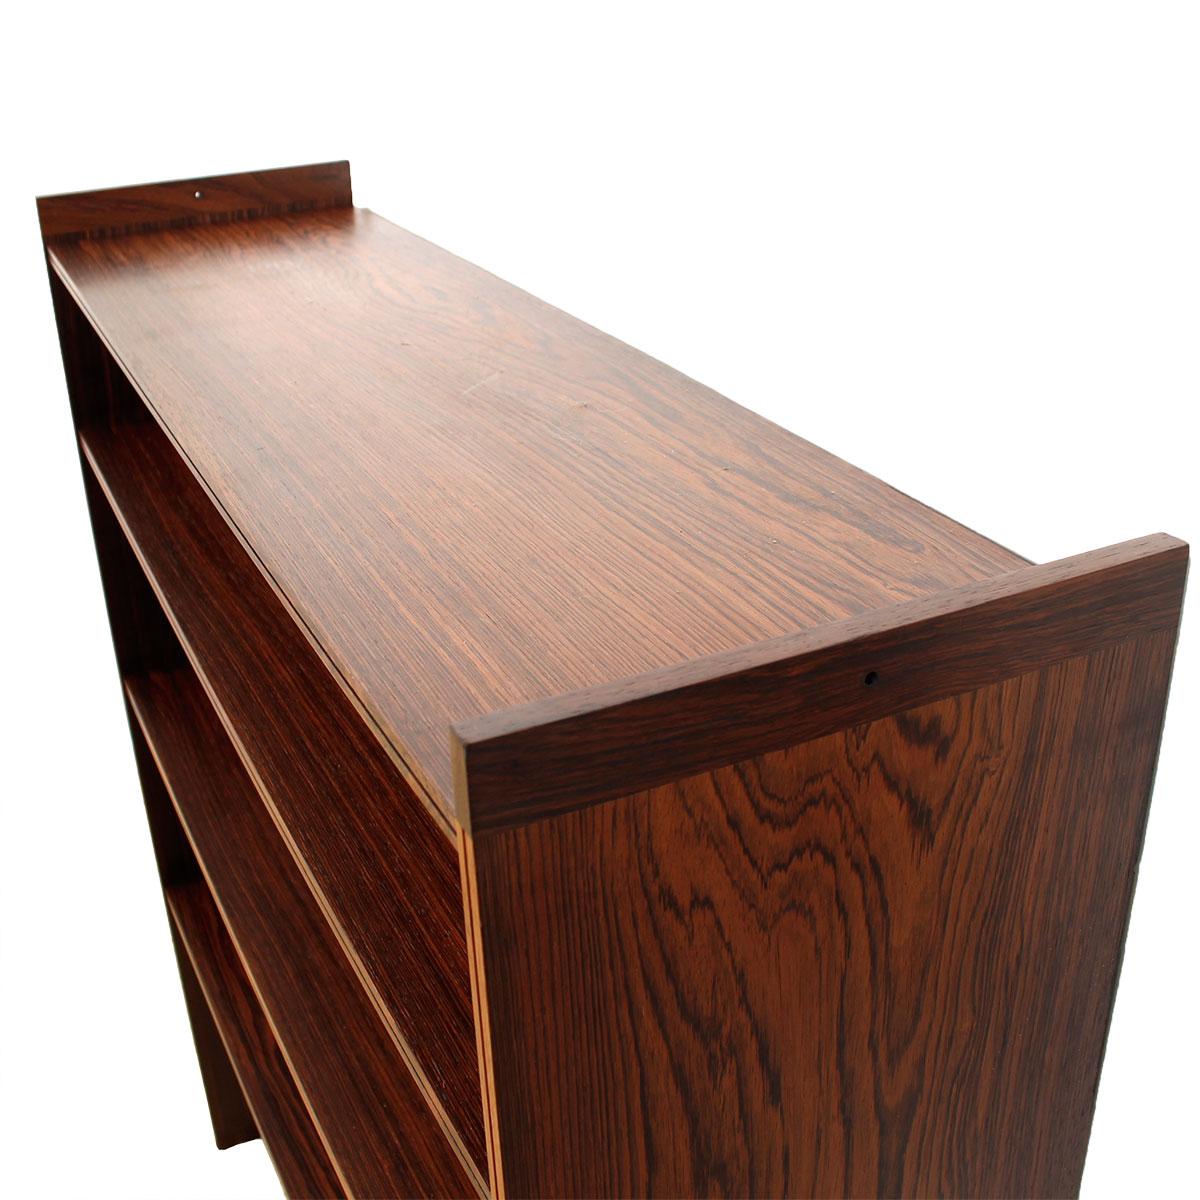 20th Century Royal Danish Embassy Slender-Edged Bookcase by Grete Jalk in Brazilian Rosewood For Sale